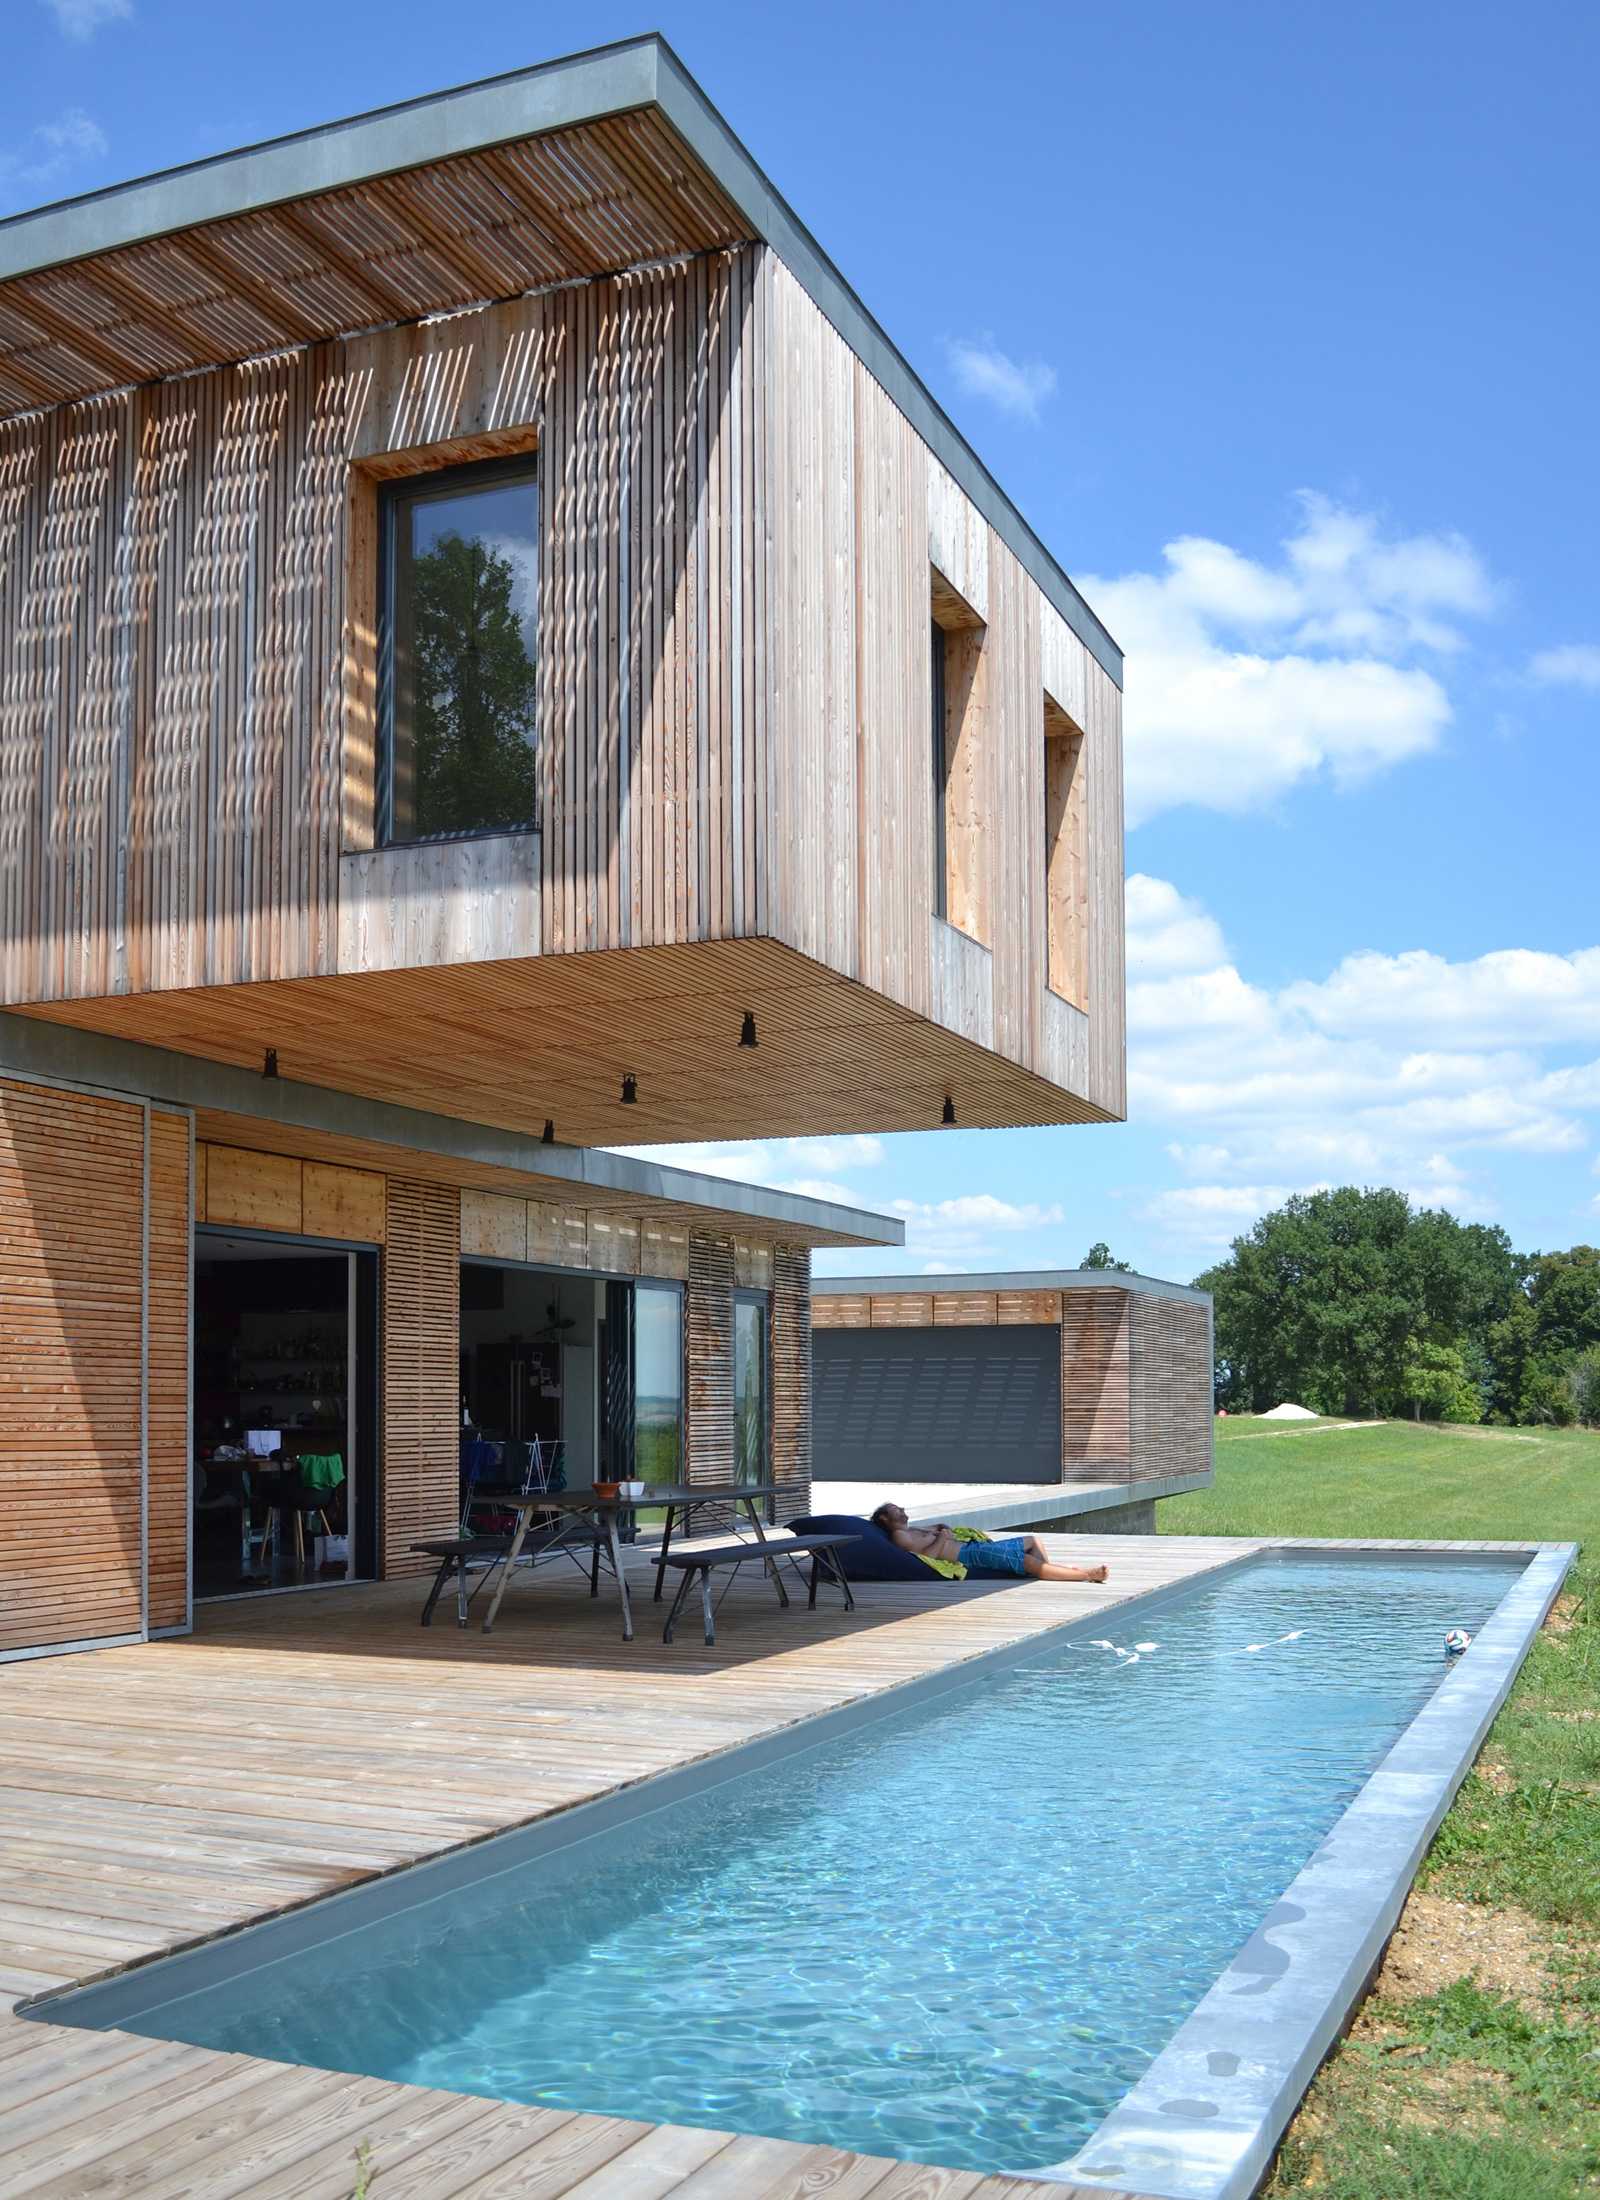 Contemporary wood and concrete house designed by an architect in Bordeaux